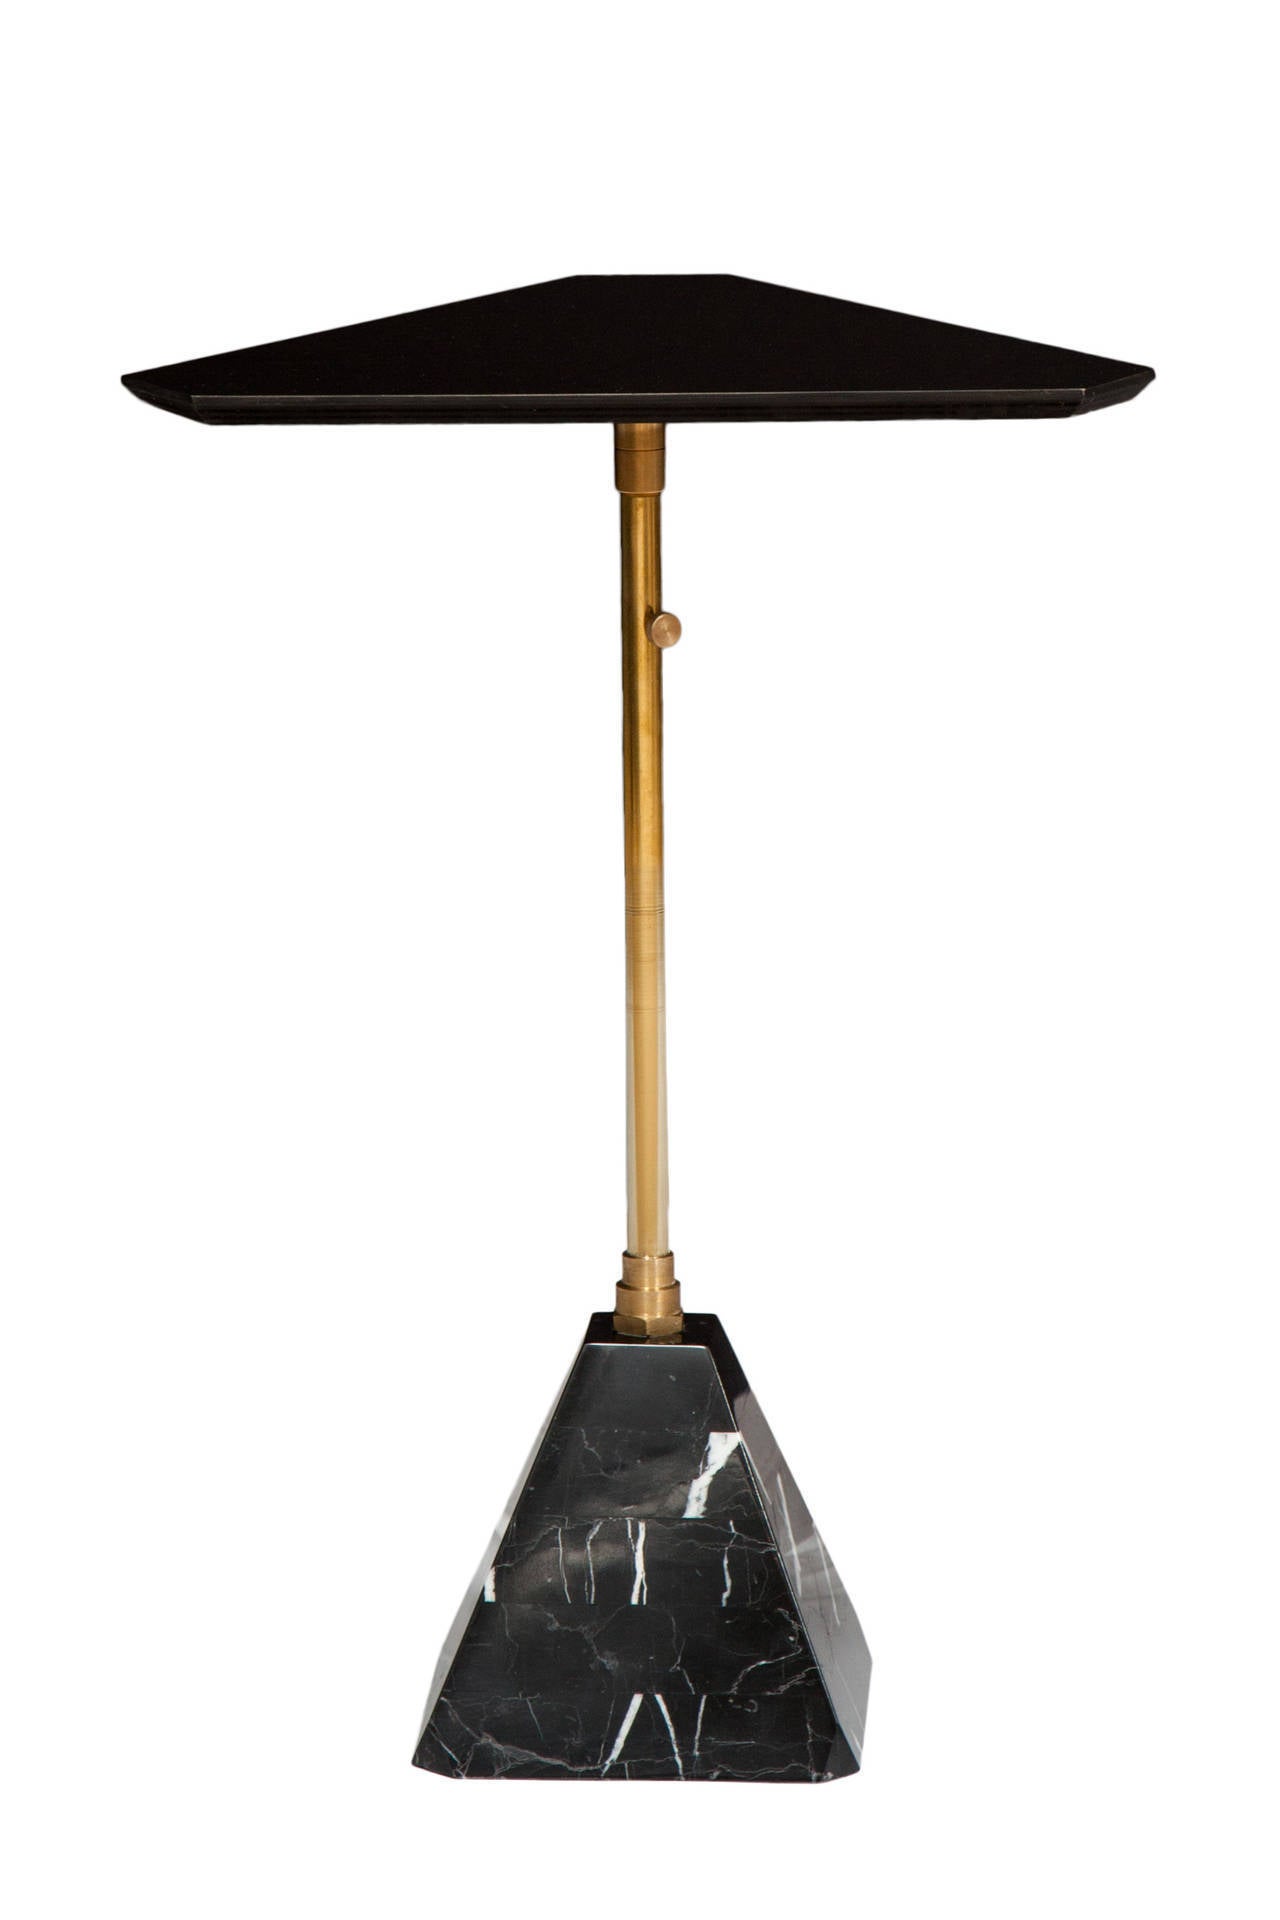 Pyramid marble base cocktail table with telescoping swivel post that supports solid black Colorfin top.
Designed by Ben Erickson for Erickson Aesthetics .

Custom orders have a lead time of 10-12 weeks FOB NYC. Lead time contingent upon selection of